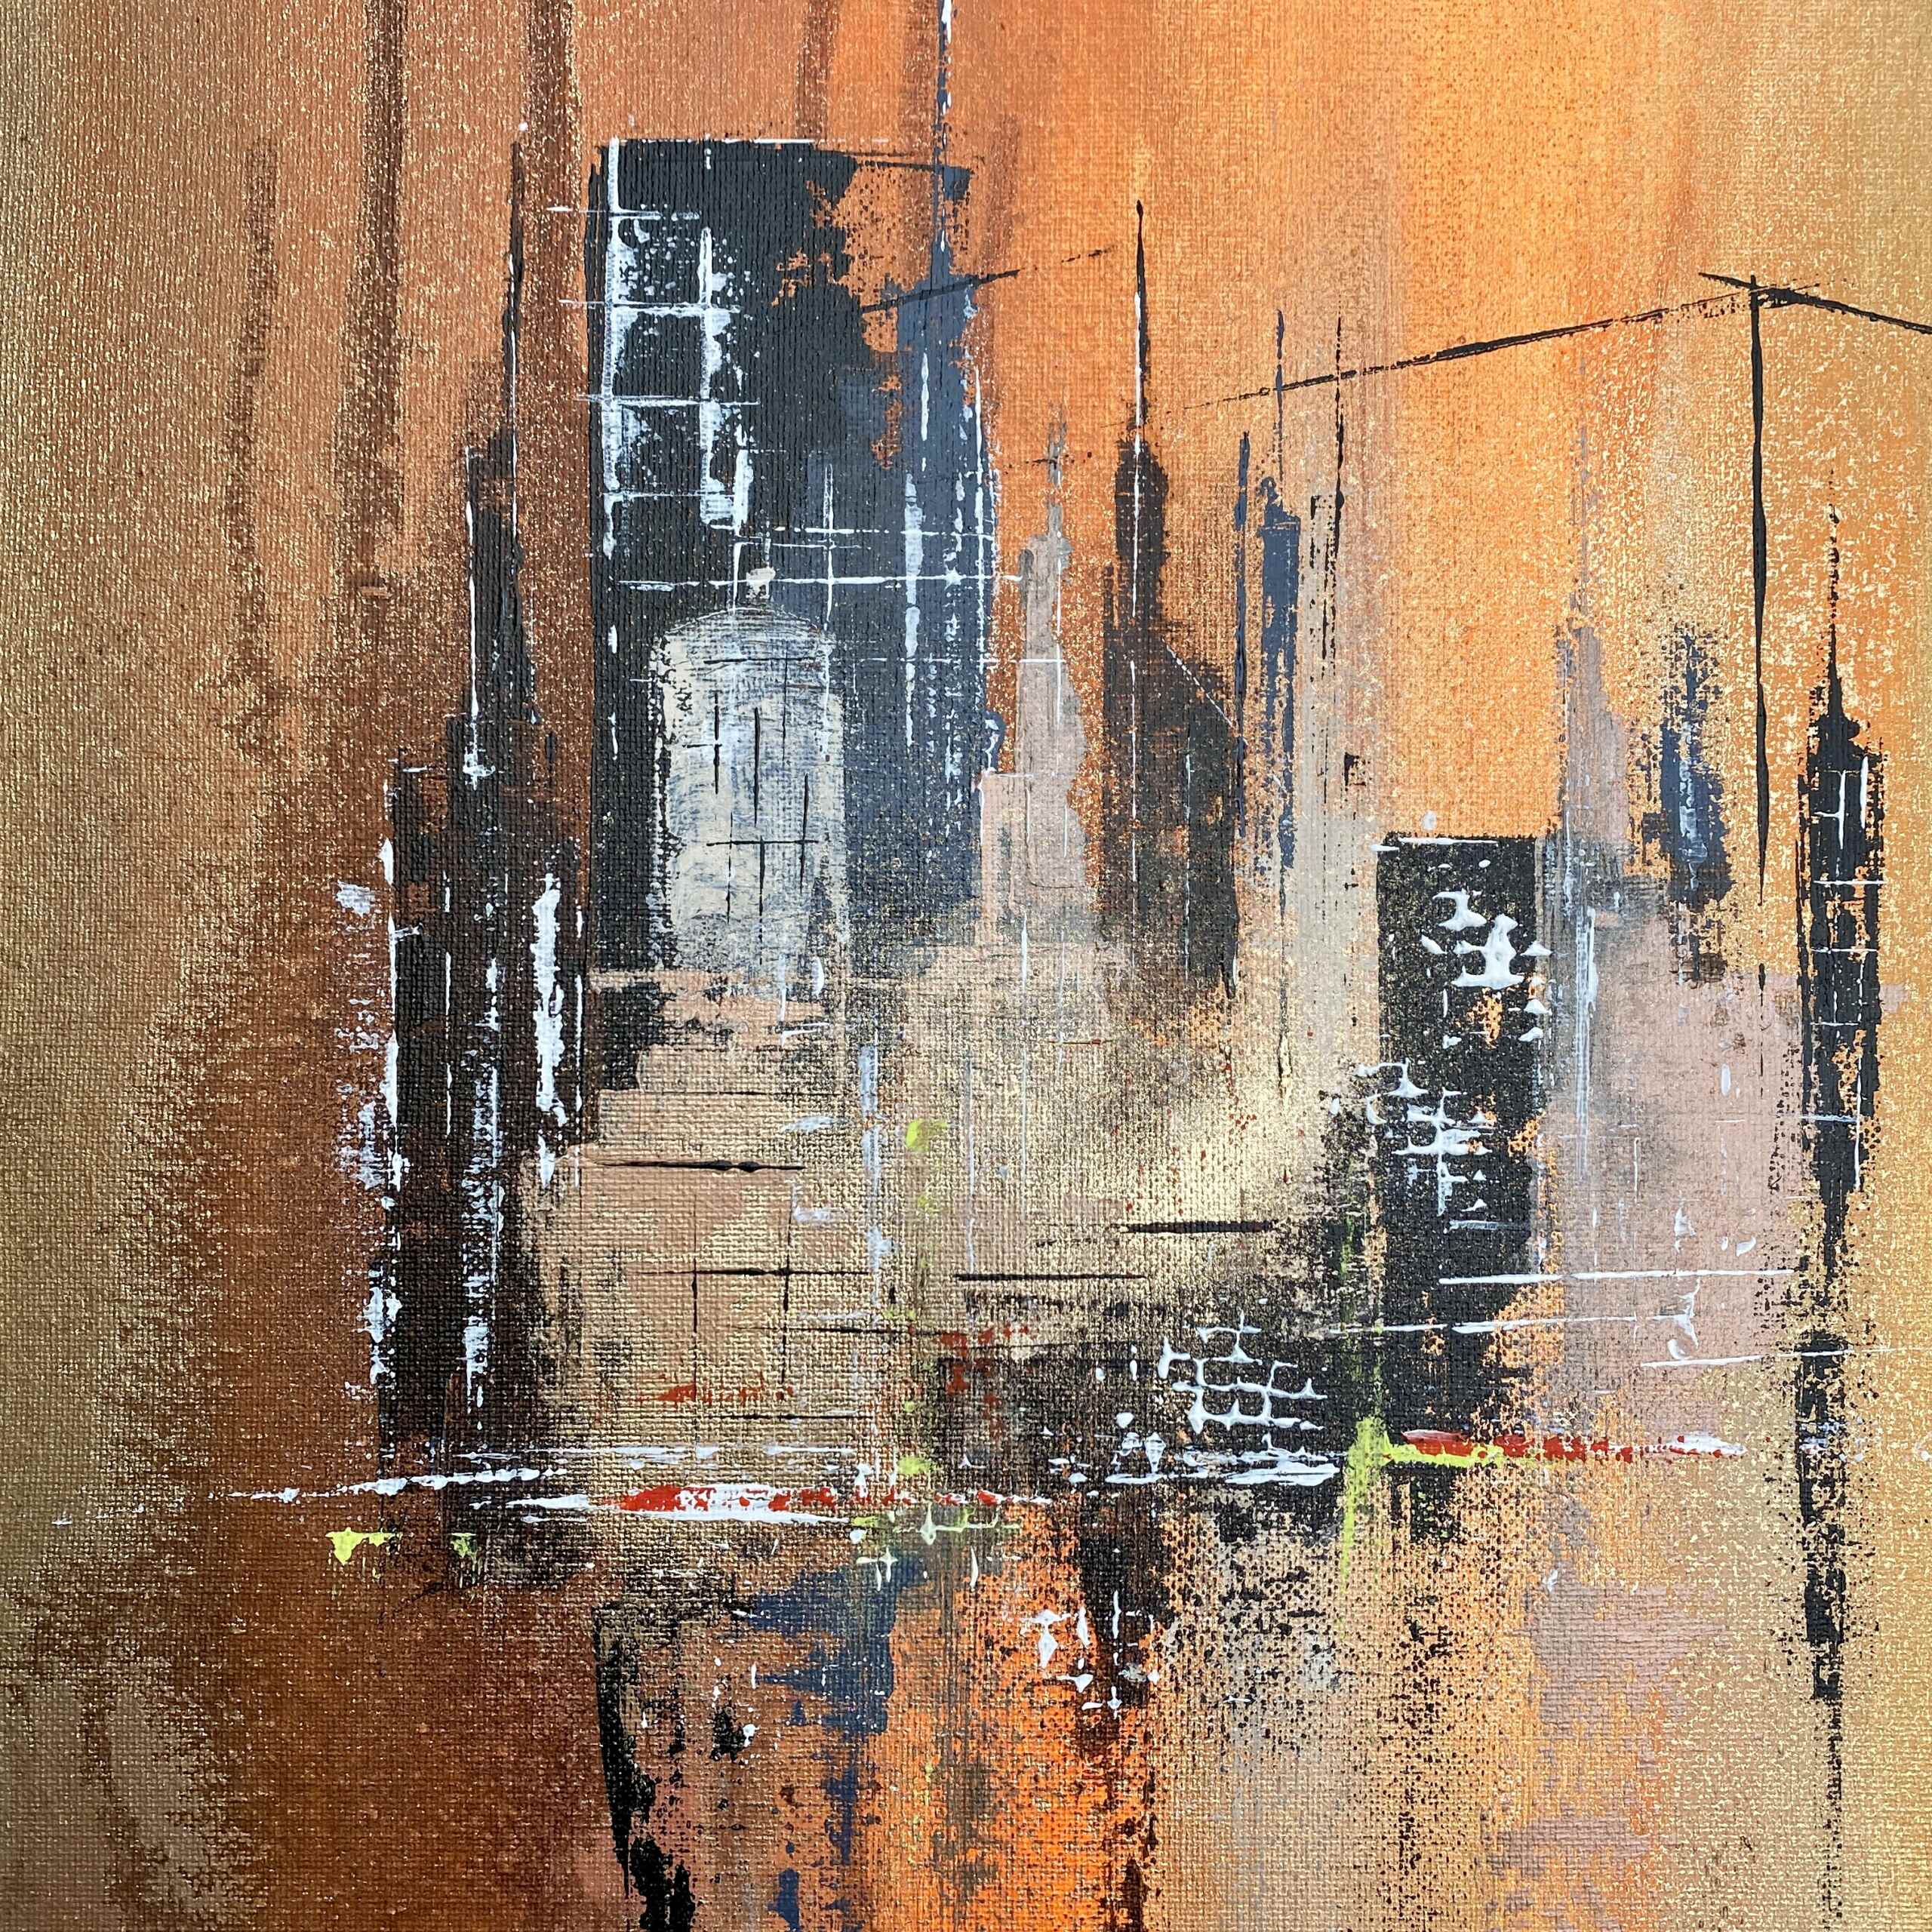 Detail of artwork "Lights of the City No 2" by Nina Groth